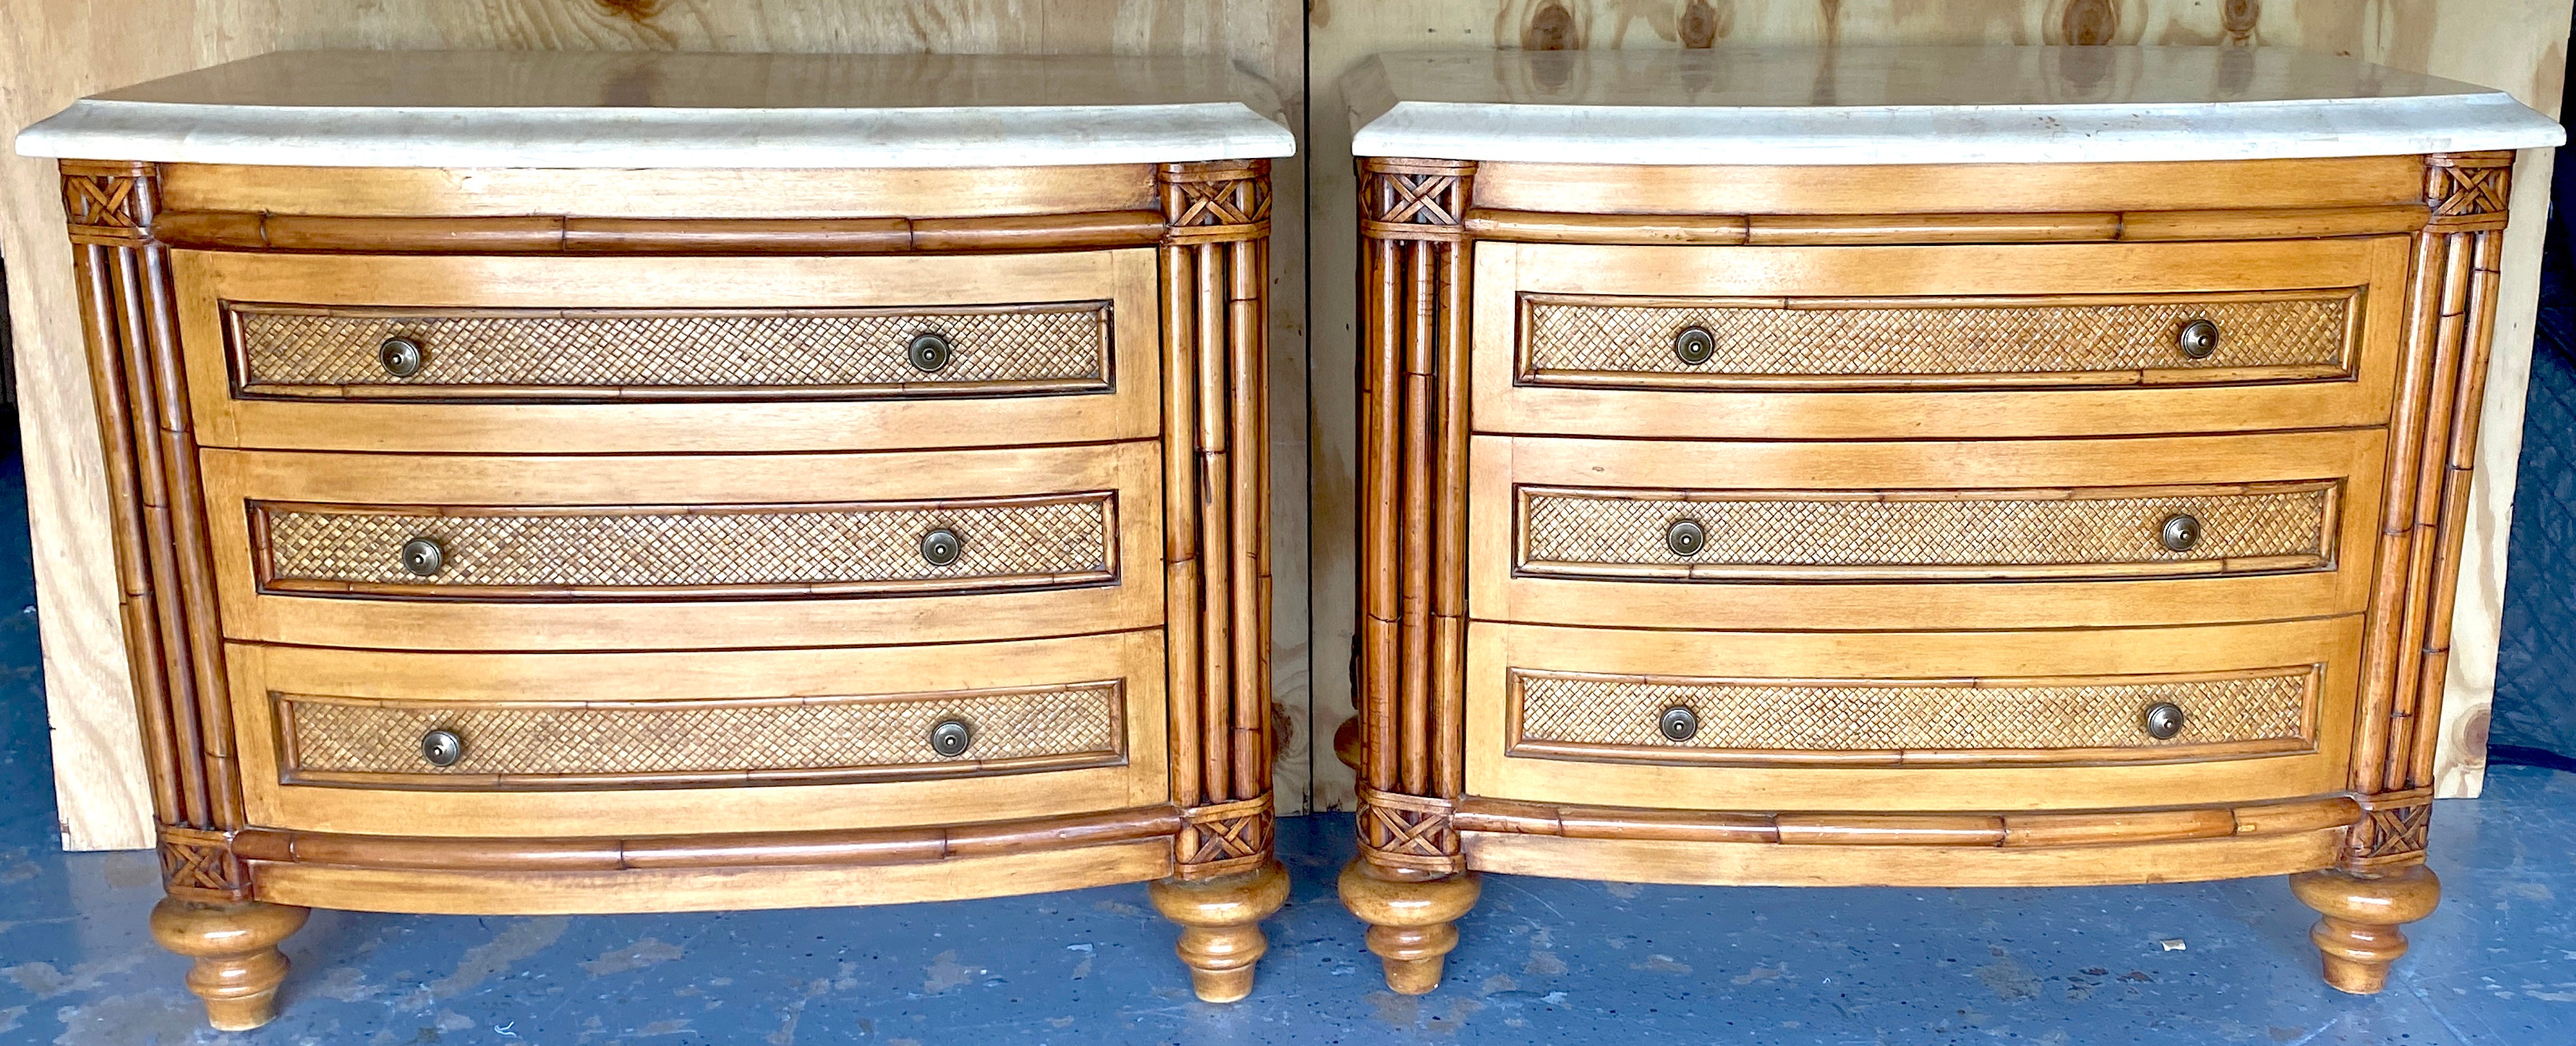 Pair British Colonial Style Bamboo, Rattan, Tessellated Stone Chests/Nightstands 

A pair of exquisite British Colonial Style Bamboo, Rattan, and Tessellated Stone Chests/Nightstands. These pieces are a testament to craftsmanship and style, offering